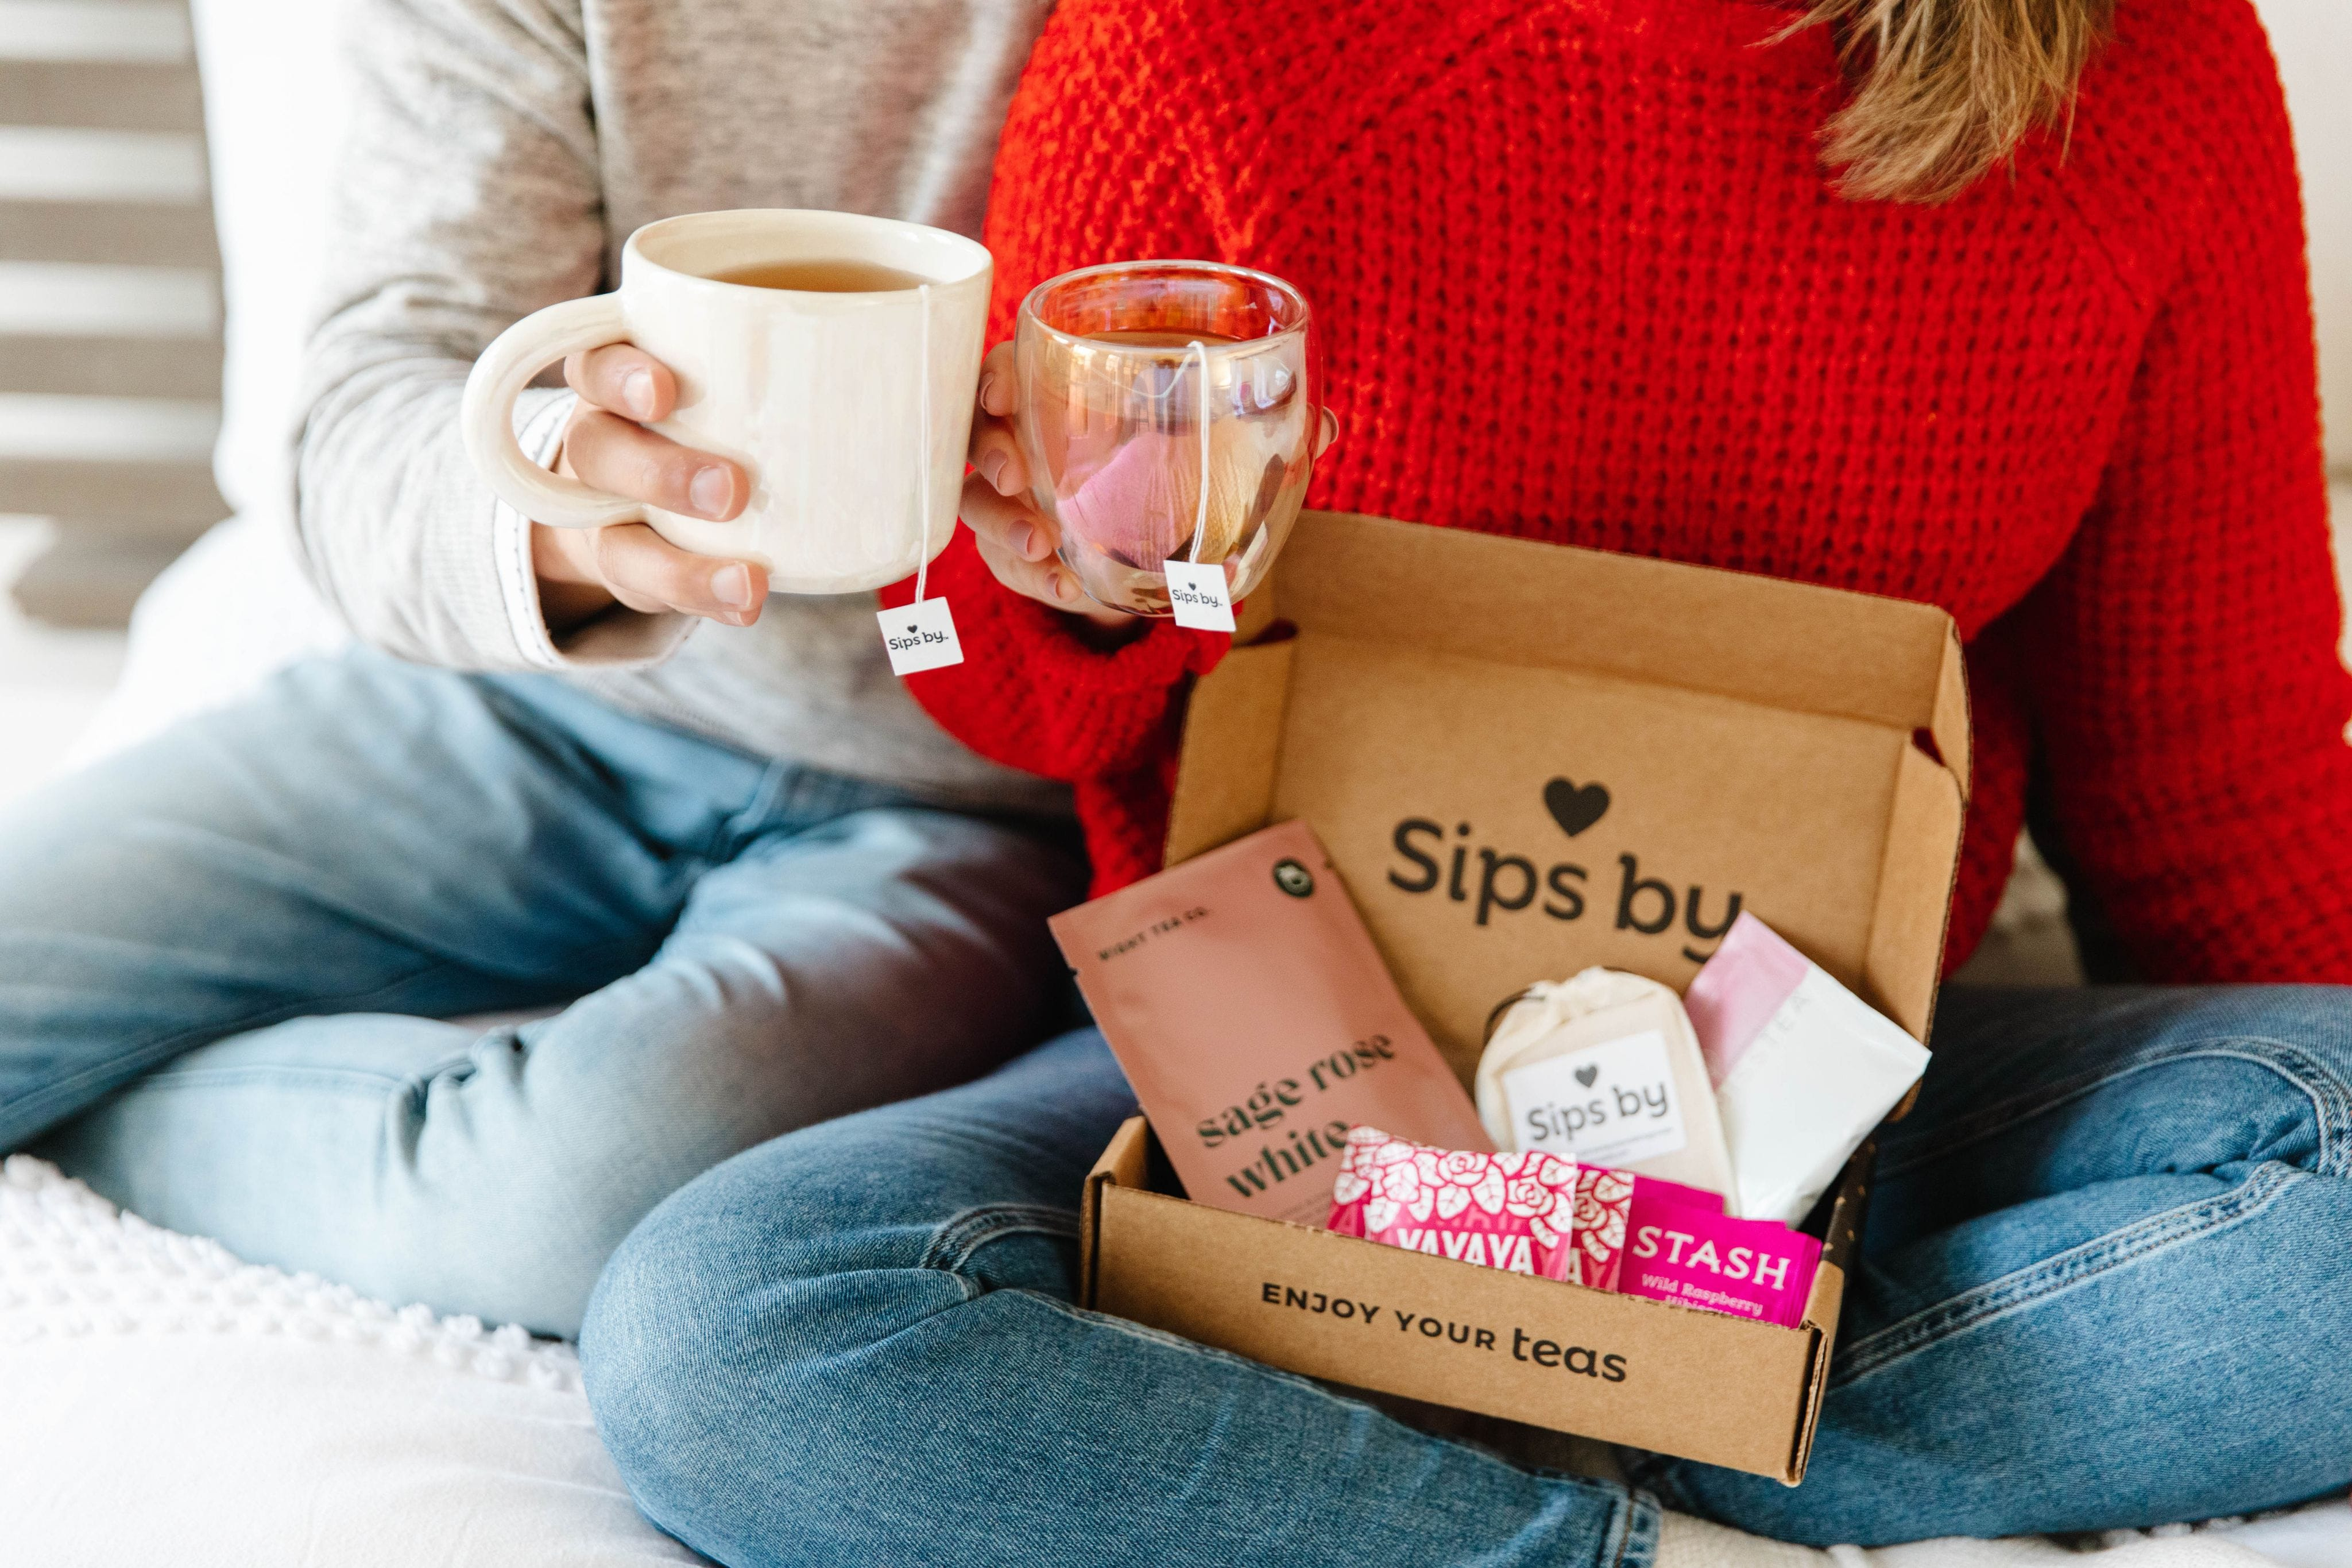 Scene of a couple cheersing their Sips by tea mugs with an open Sips by Box in one person's lap